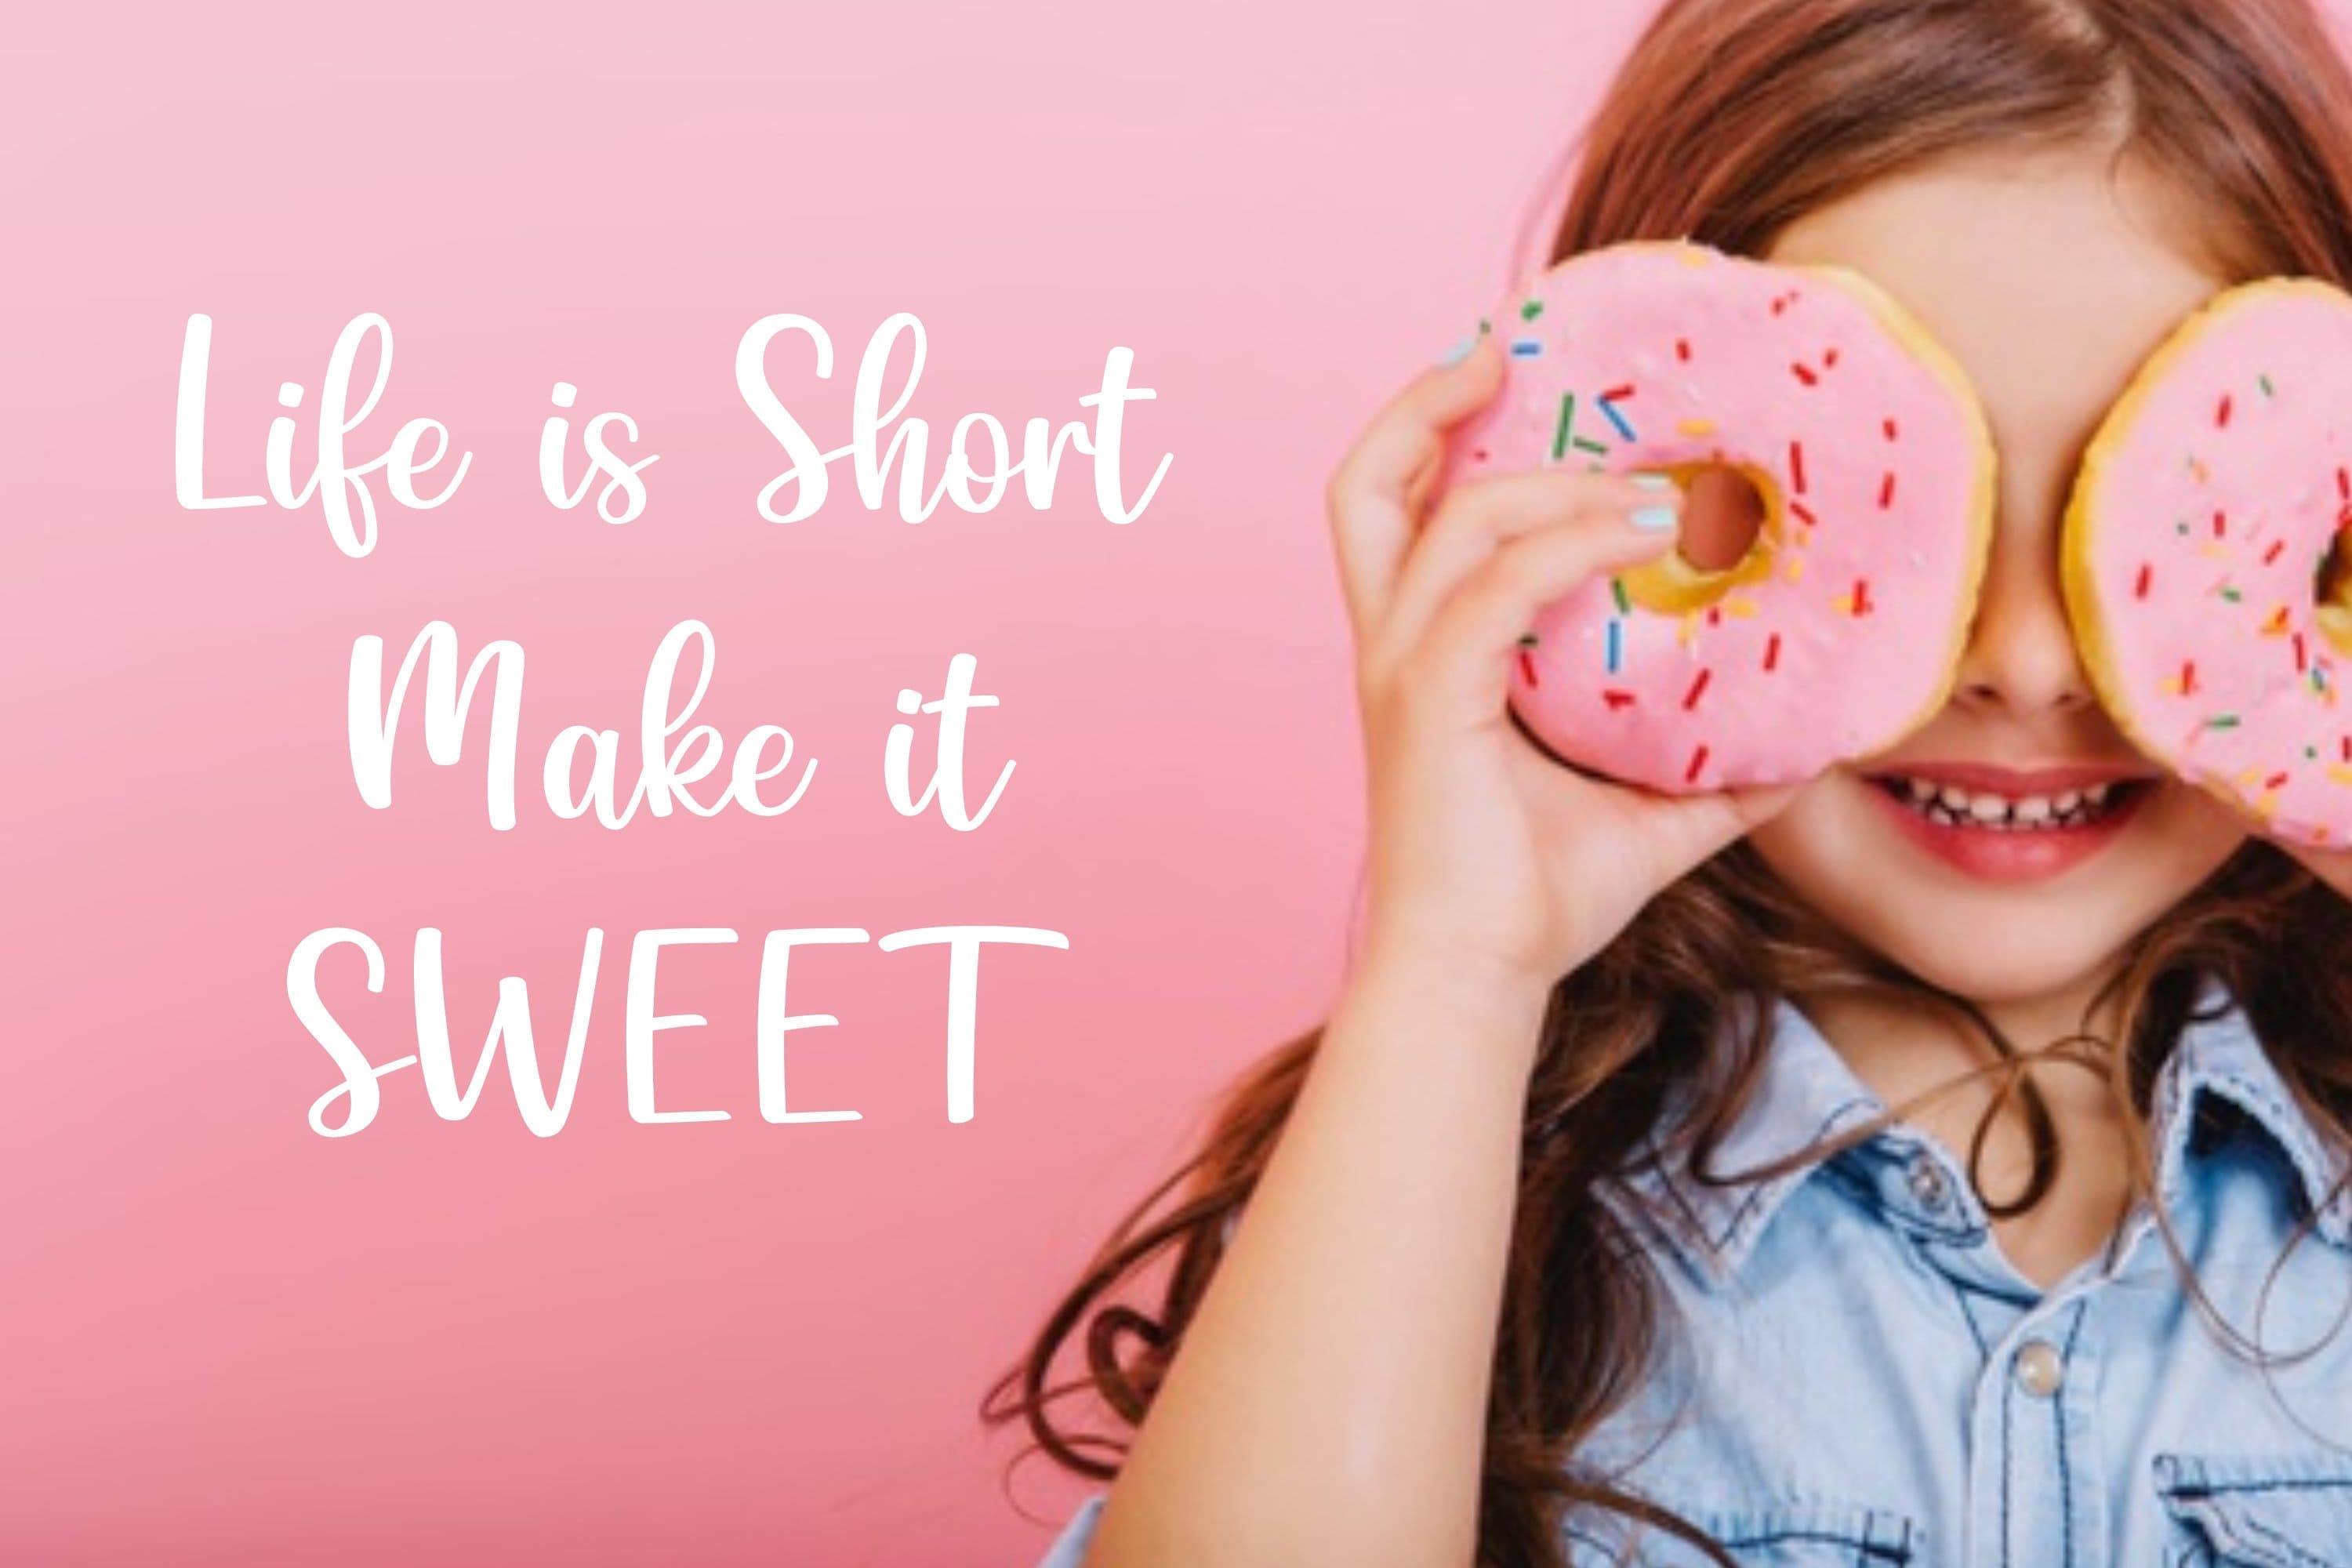 Life is Short Make it Sweet, girl with Donuts.